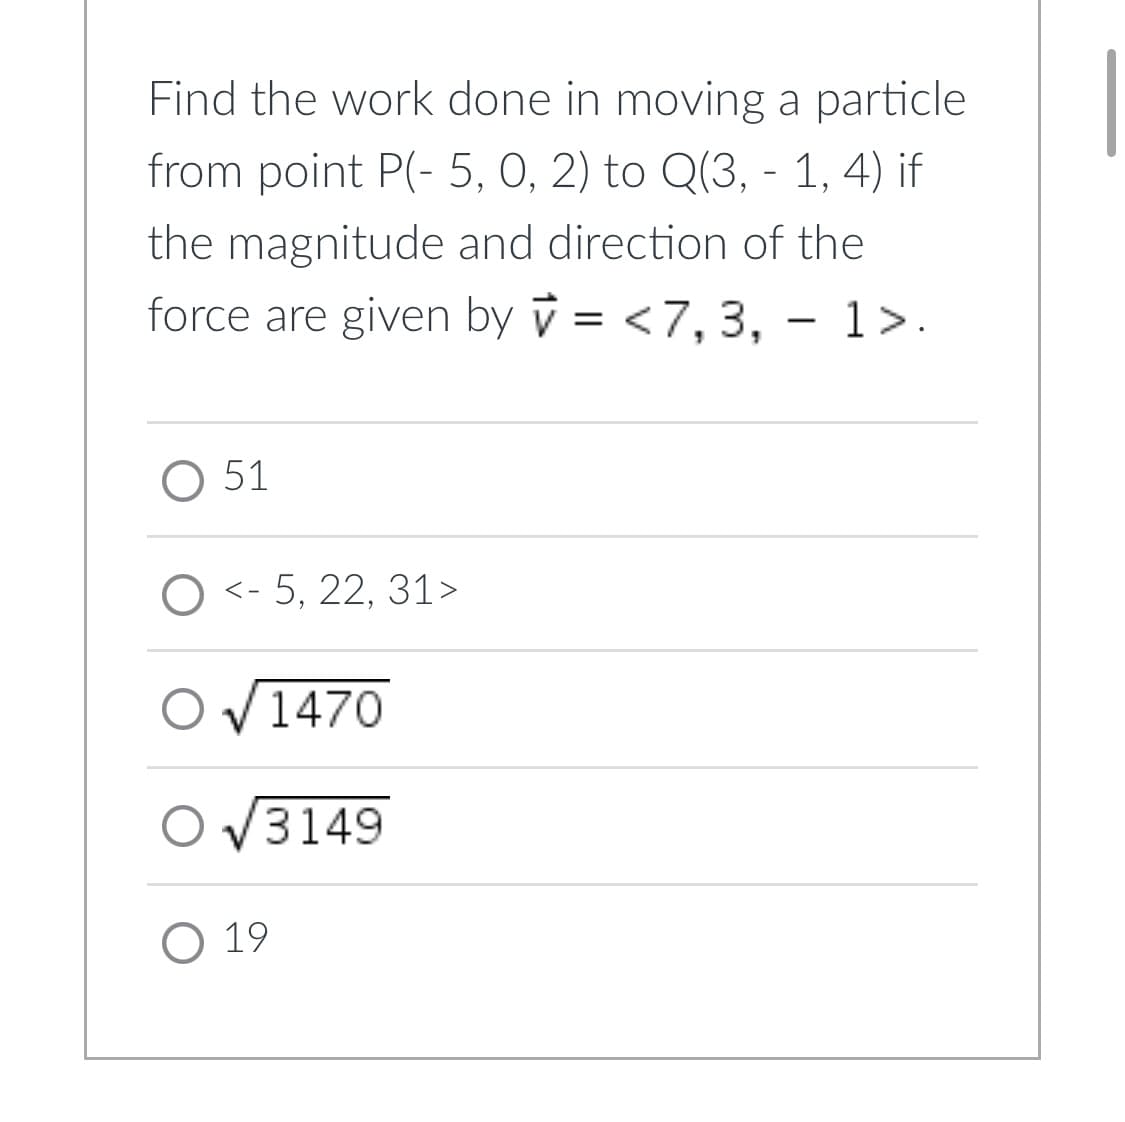 Find the work done in moving a particle
from point P(-5, 0, 2) to Q(3, - 1, 4) if
the magnitude and direction of the
force are given by = <7, 3, - 1>.
O 51
O <-5, 22, 31>
1470
O√3149
O 19